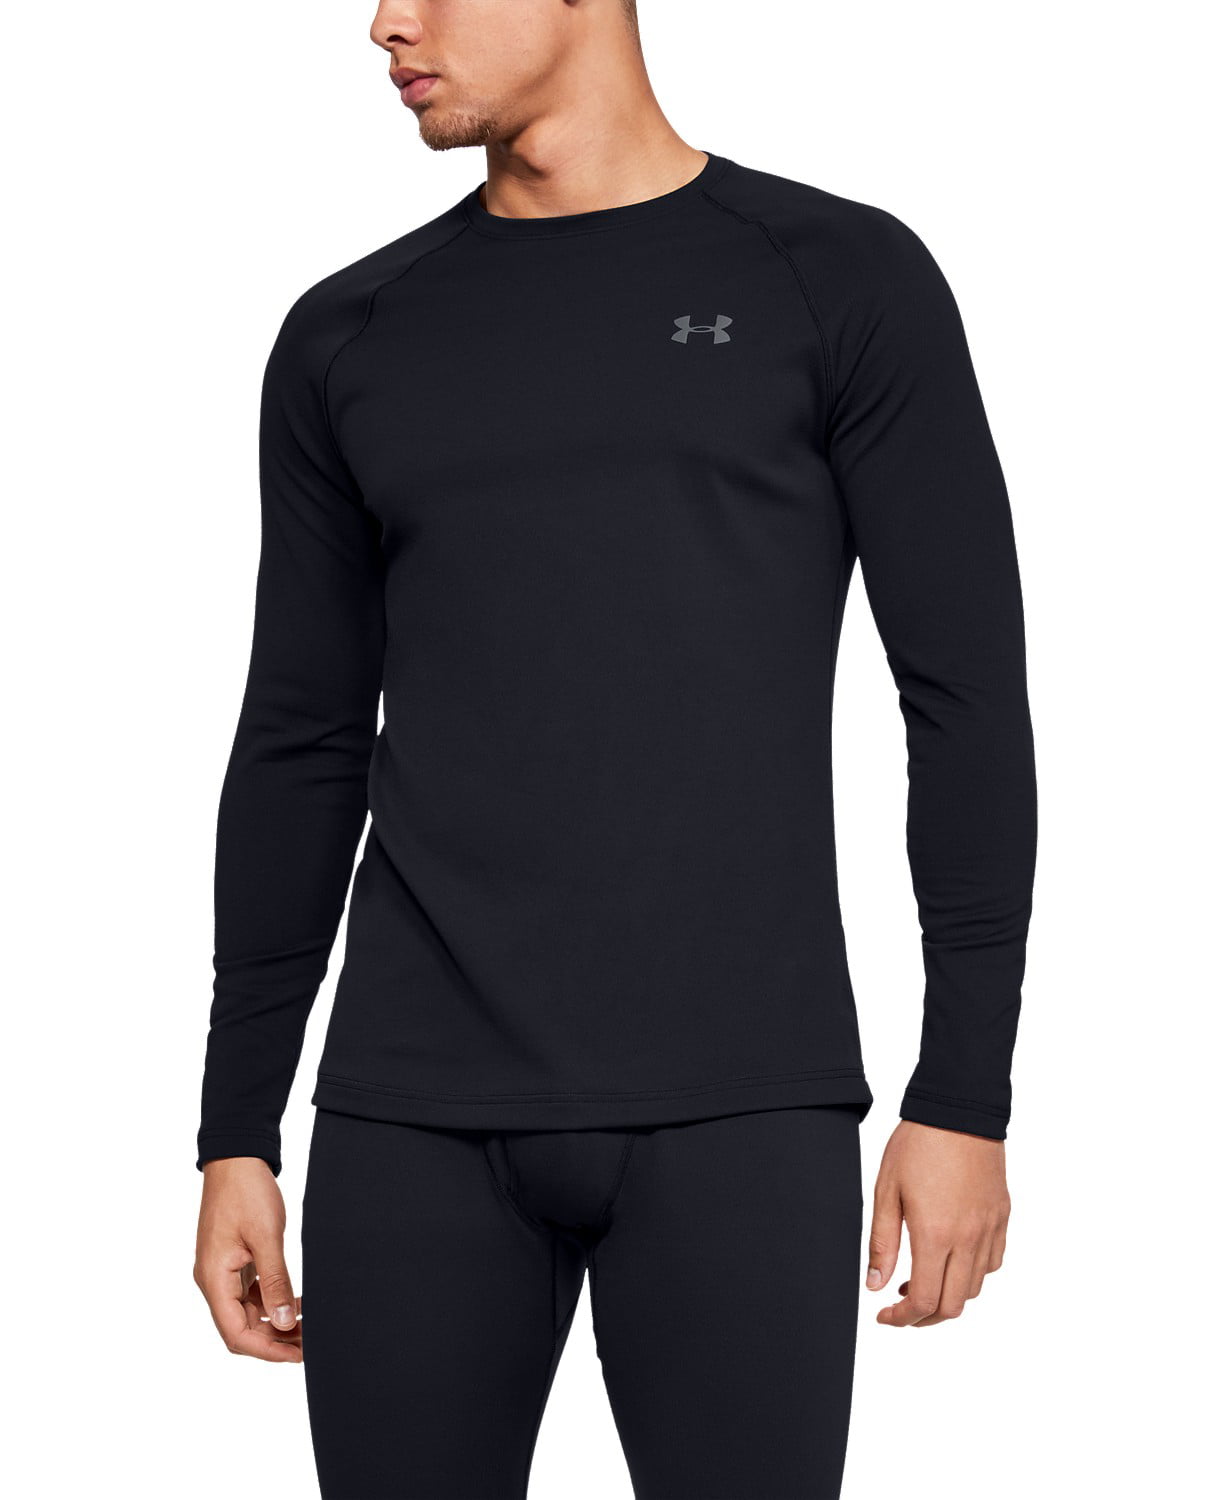 Men's Super Thermal Compression Armour Base Layer Long sleeve Cold Wear Top 